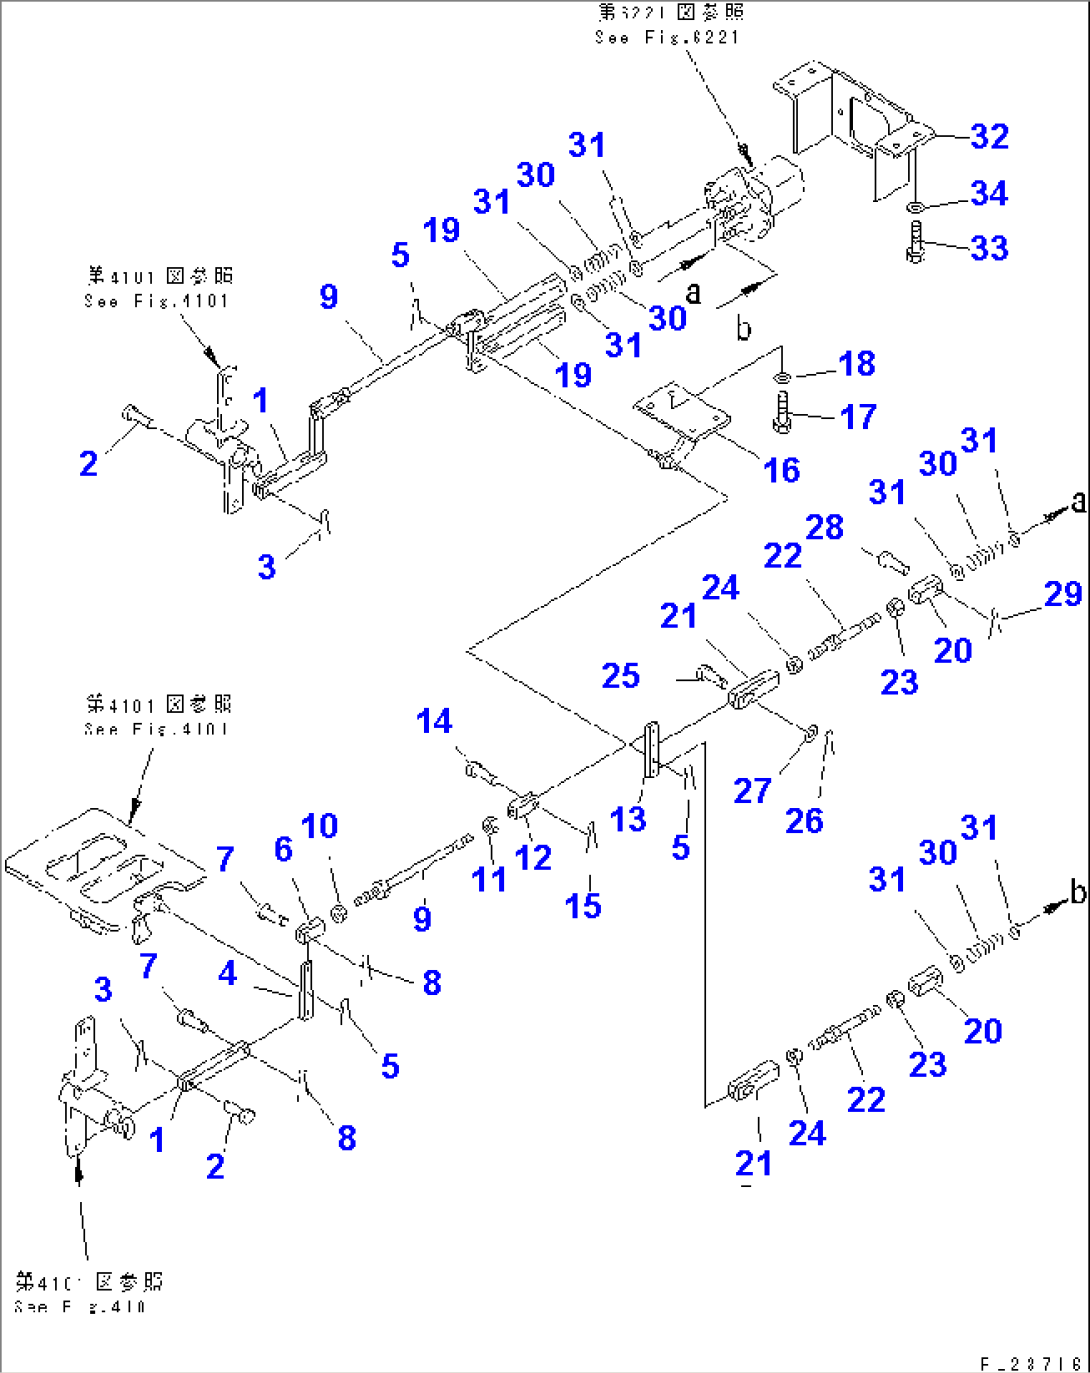 TRAVEL CONTROL LEVER AND LINKAGE (2/2)(#1001-1201)